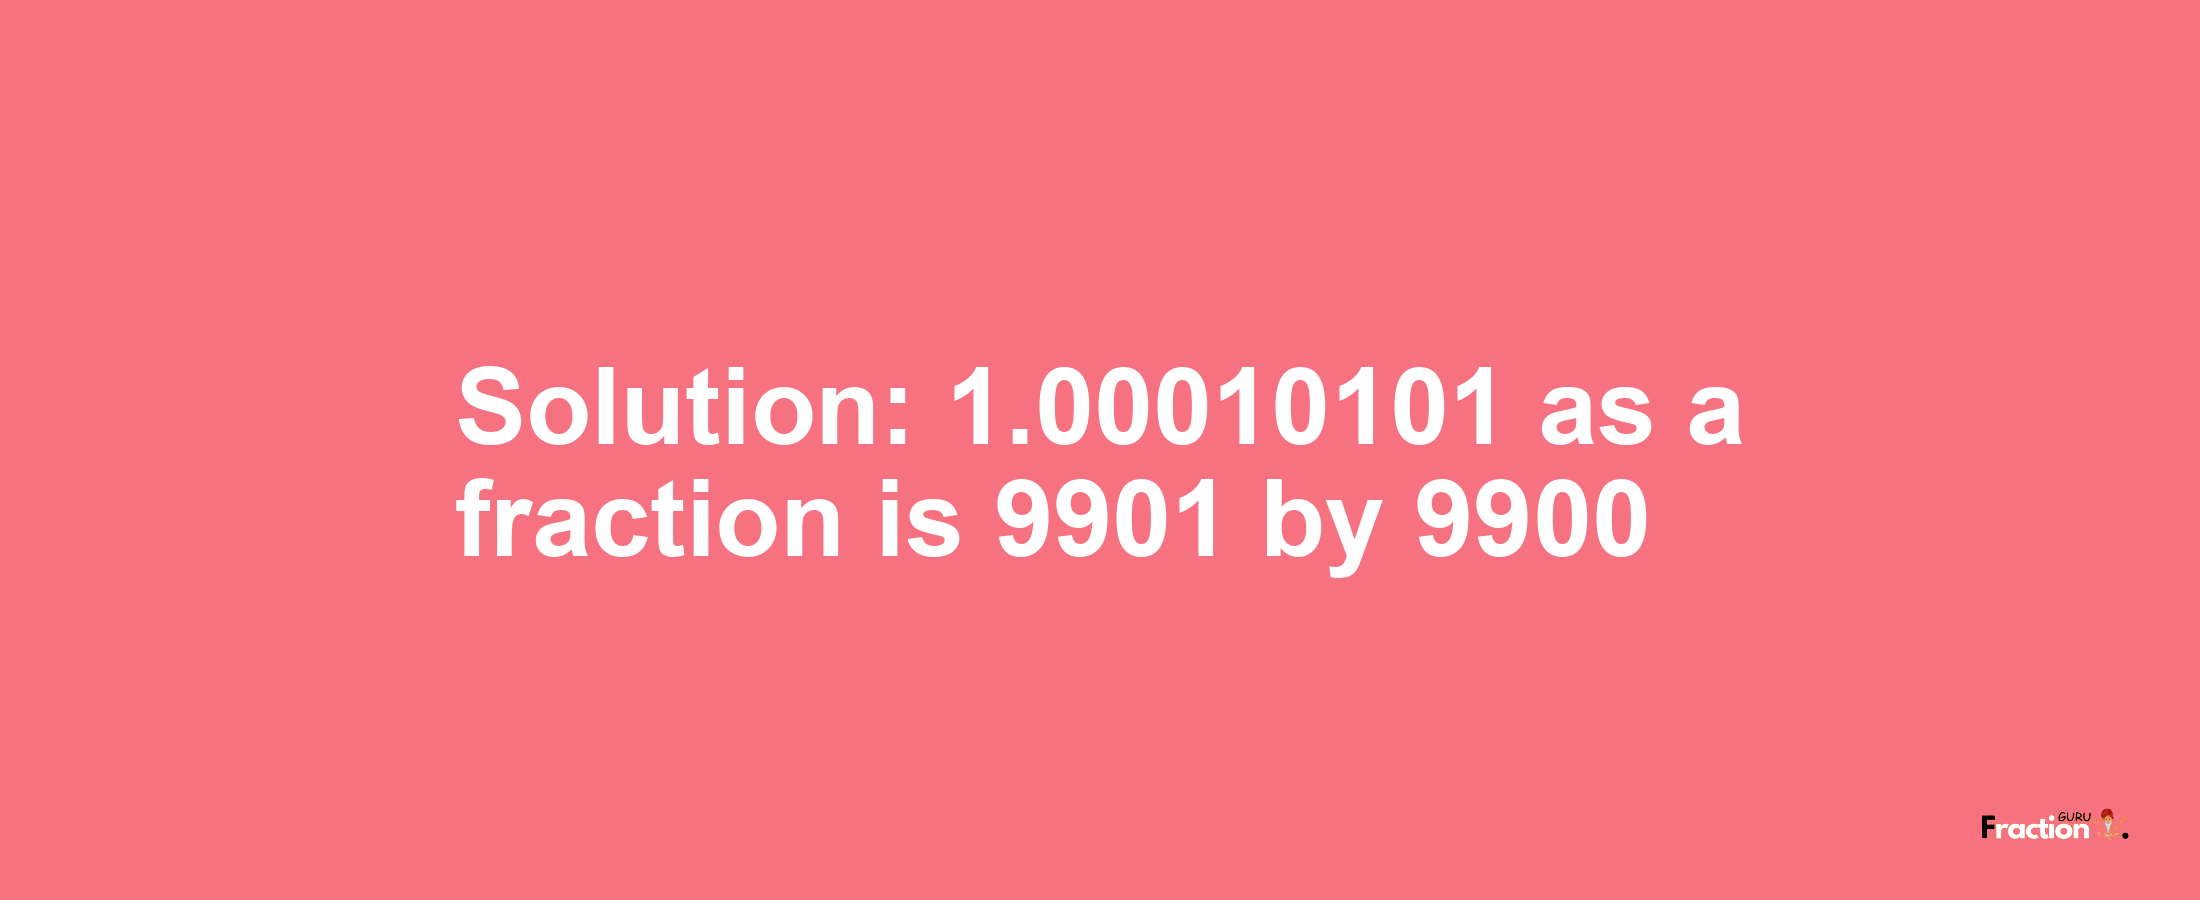 Solution:1.00010101 as a fraction is 9901/9900